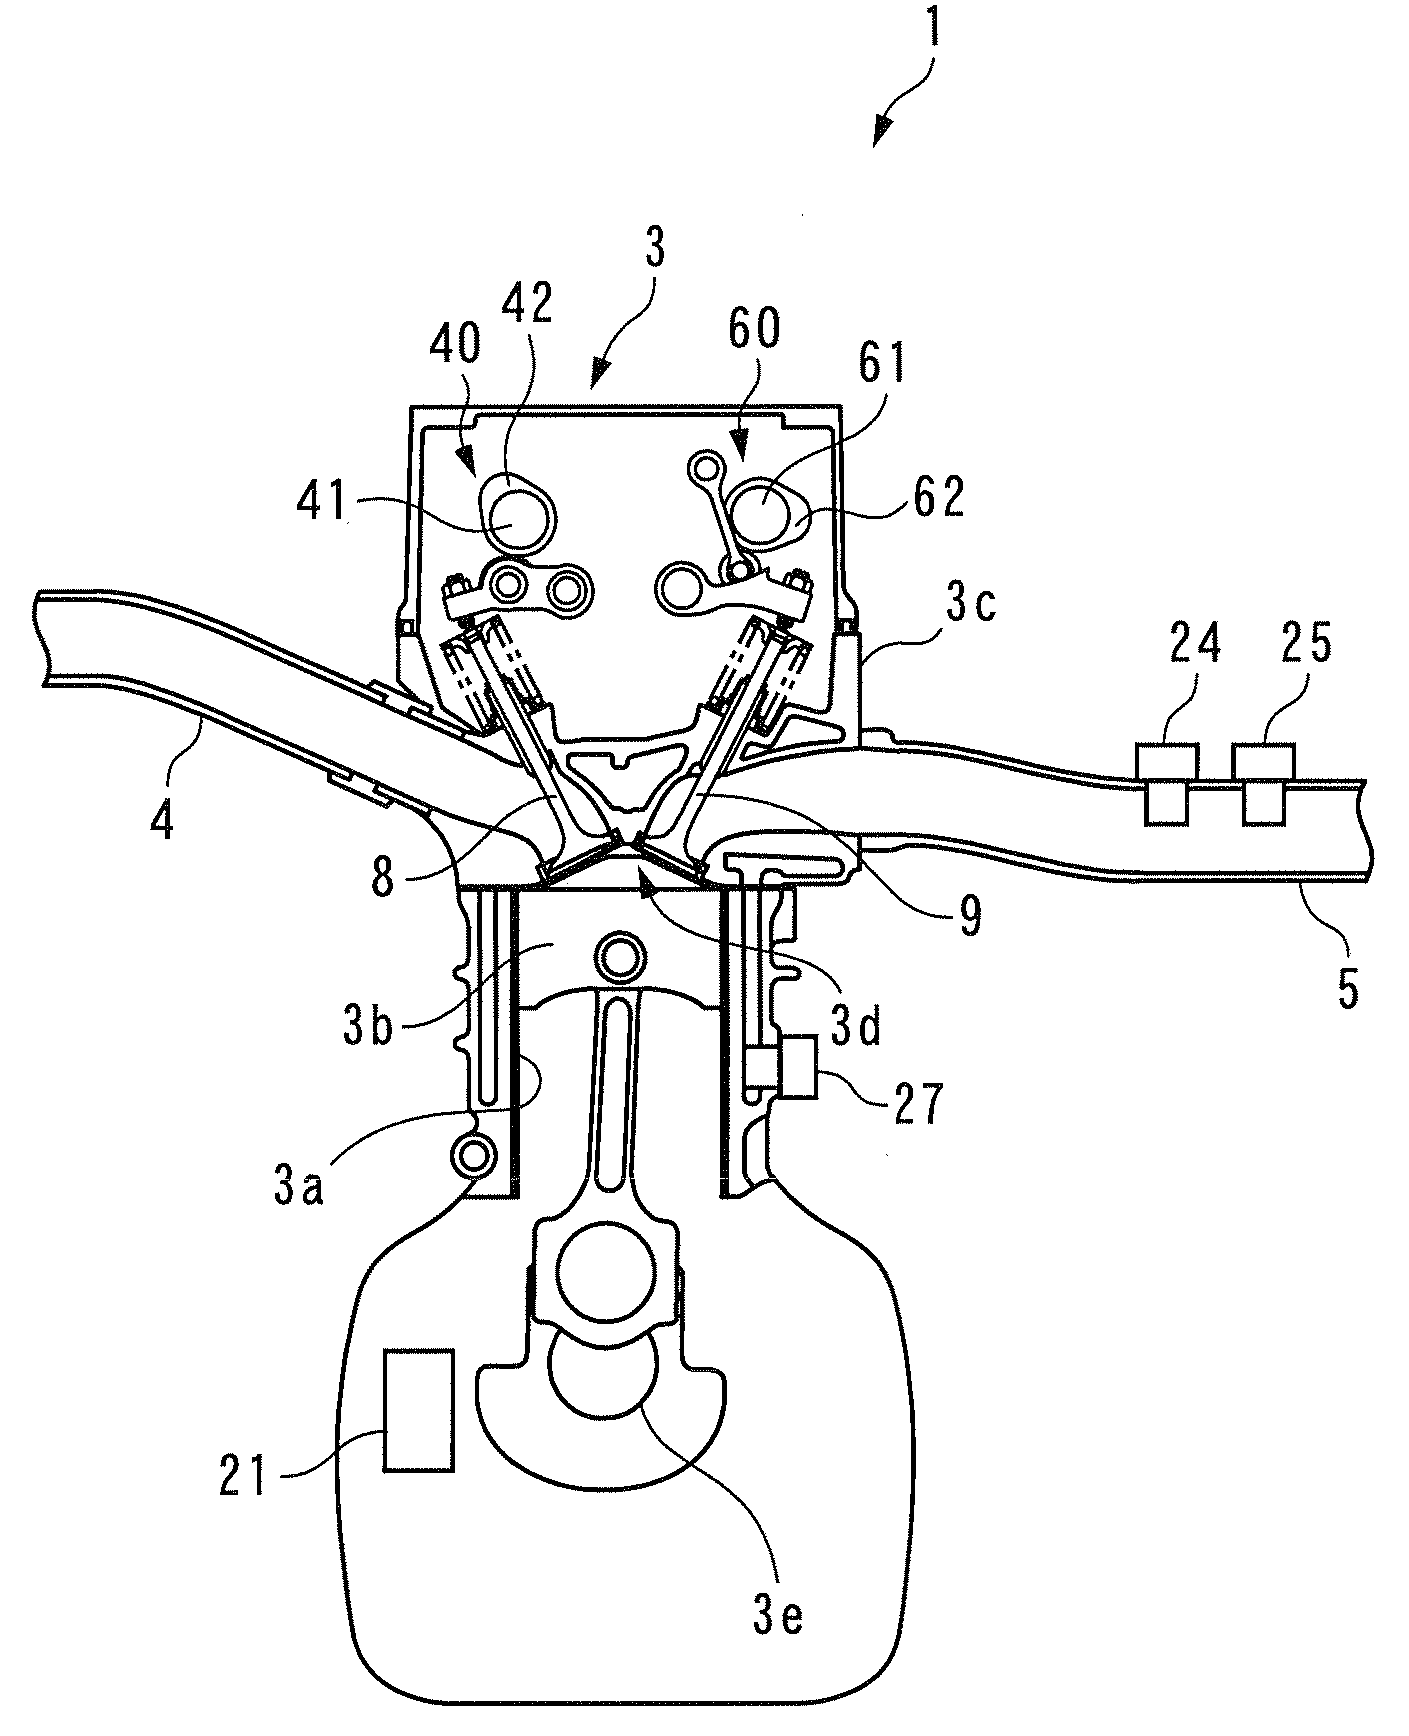 Internal egr control device for internal combustion engine